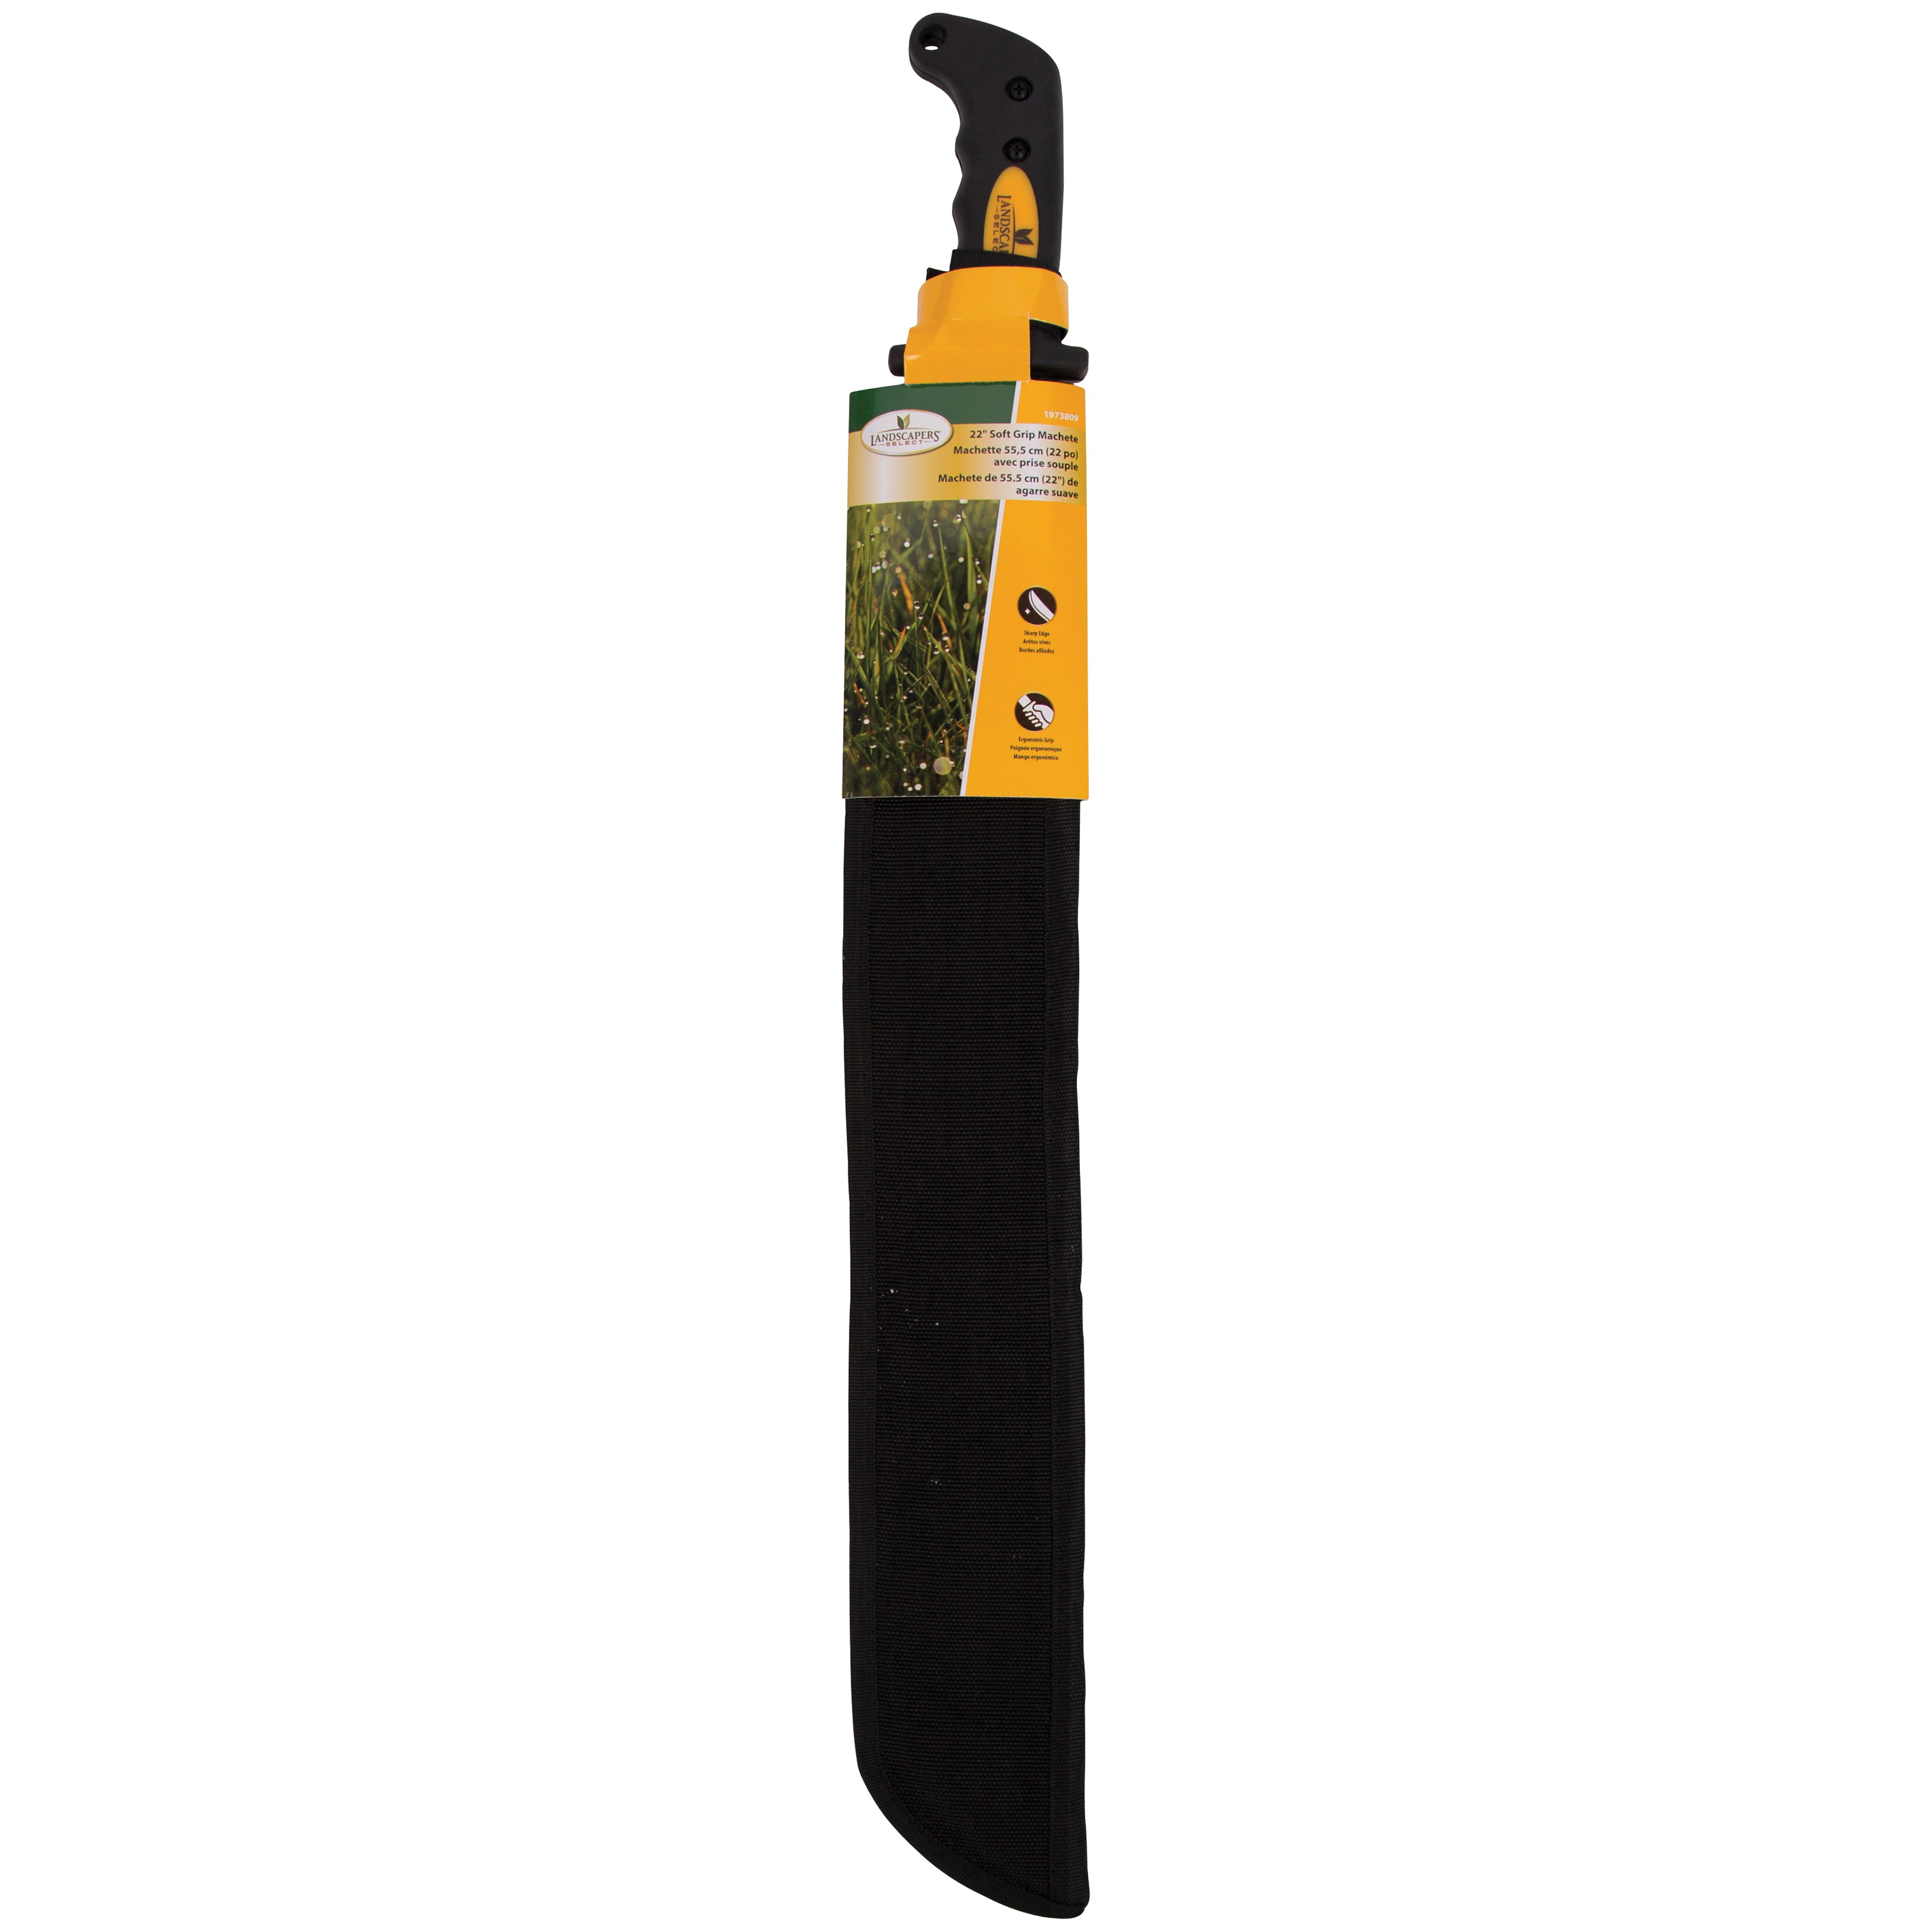 Landscapers Select JLO-003-N3L 22 in Blade, 27-1/2 in OAL, 22 in Blade, High Carbon Steel Blade, Rubber Handle - 2